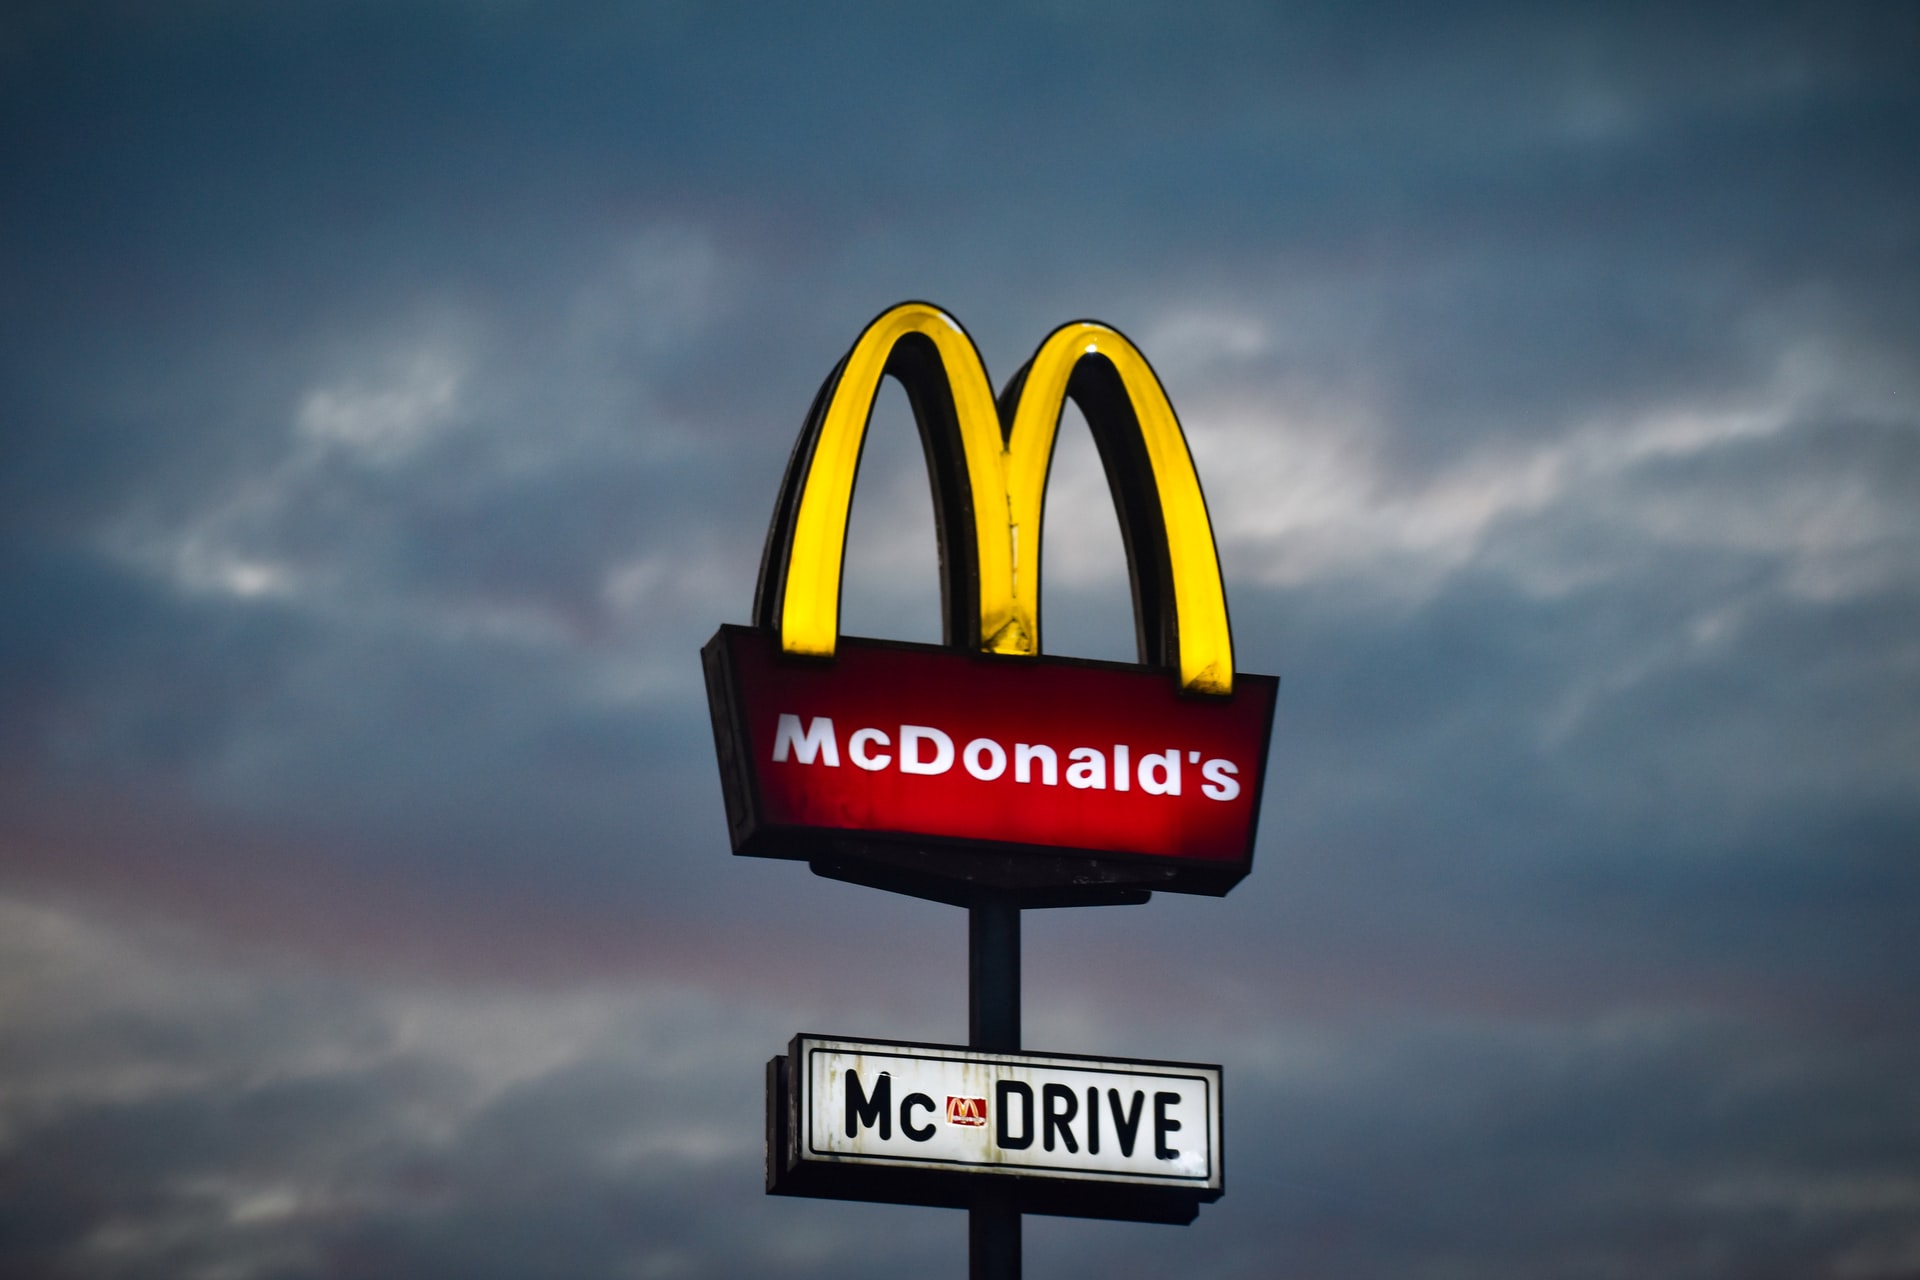 AP: McDonald’s CEO Steps Down After Relationship with Employee